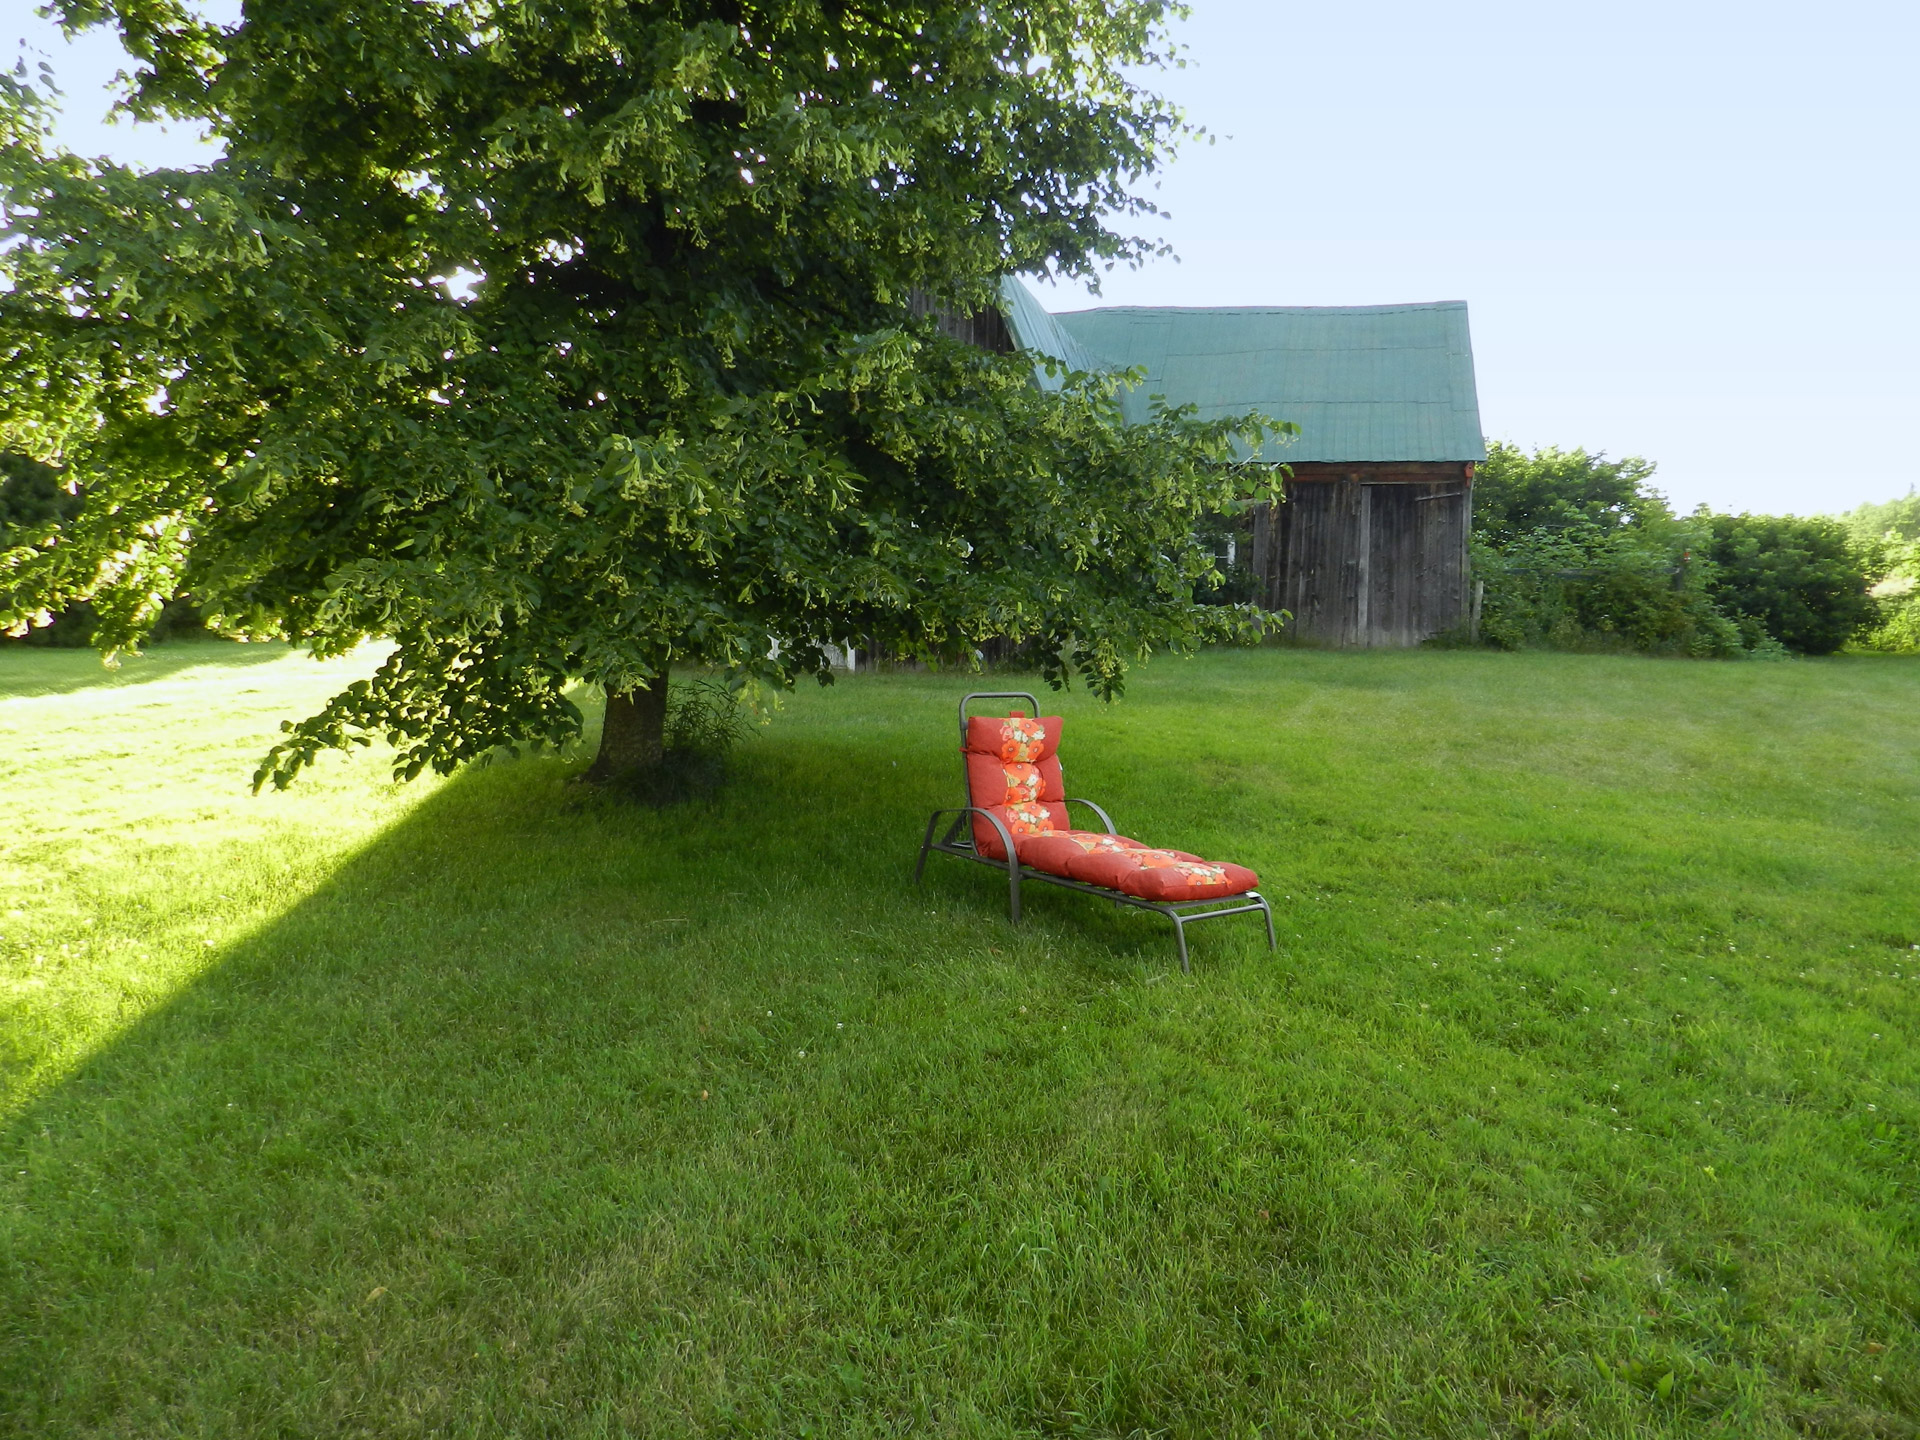 chaise longue grassy countryside ready for a nap (1) free photo